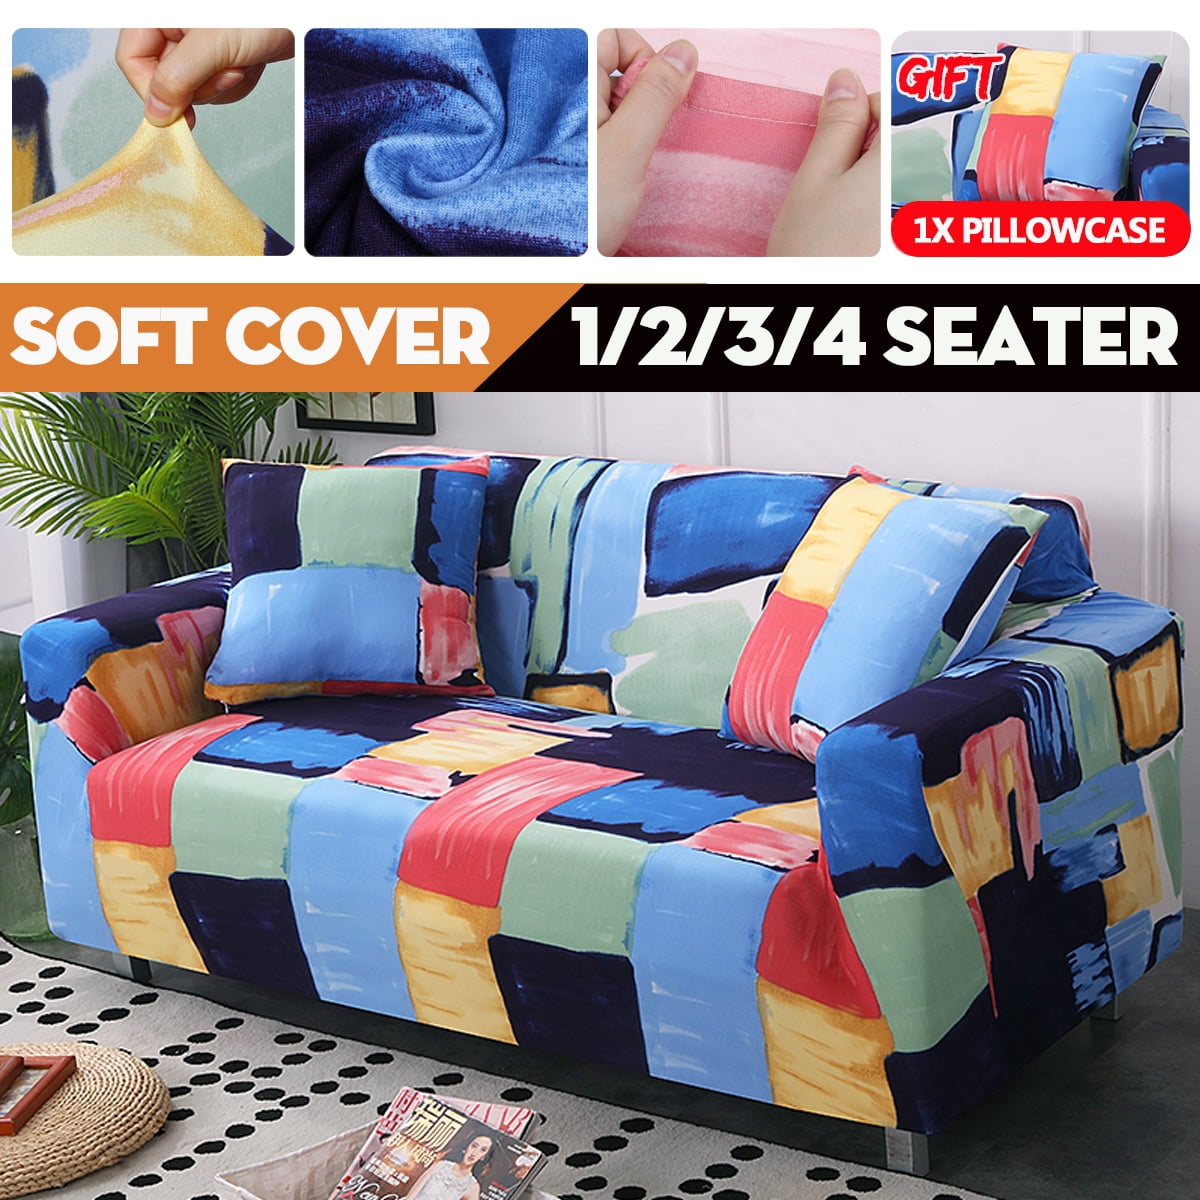 Pure Multicolor Stretch Sofa Soft Cover Solid 4Seater Couch Covers W/ Pillowcase 